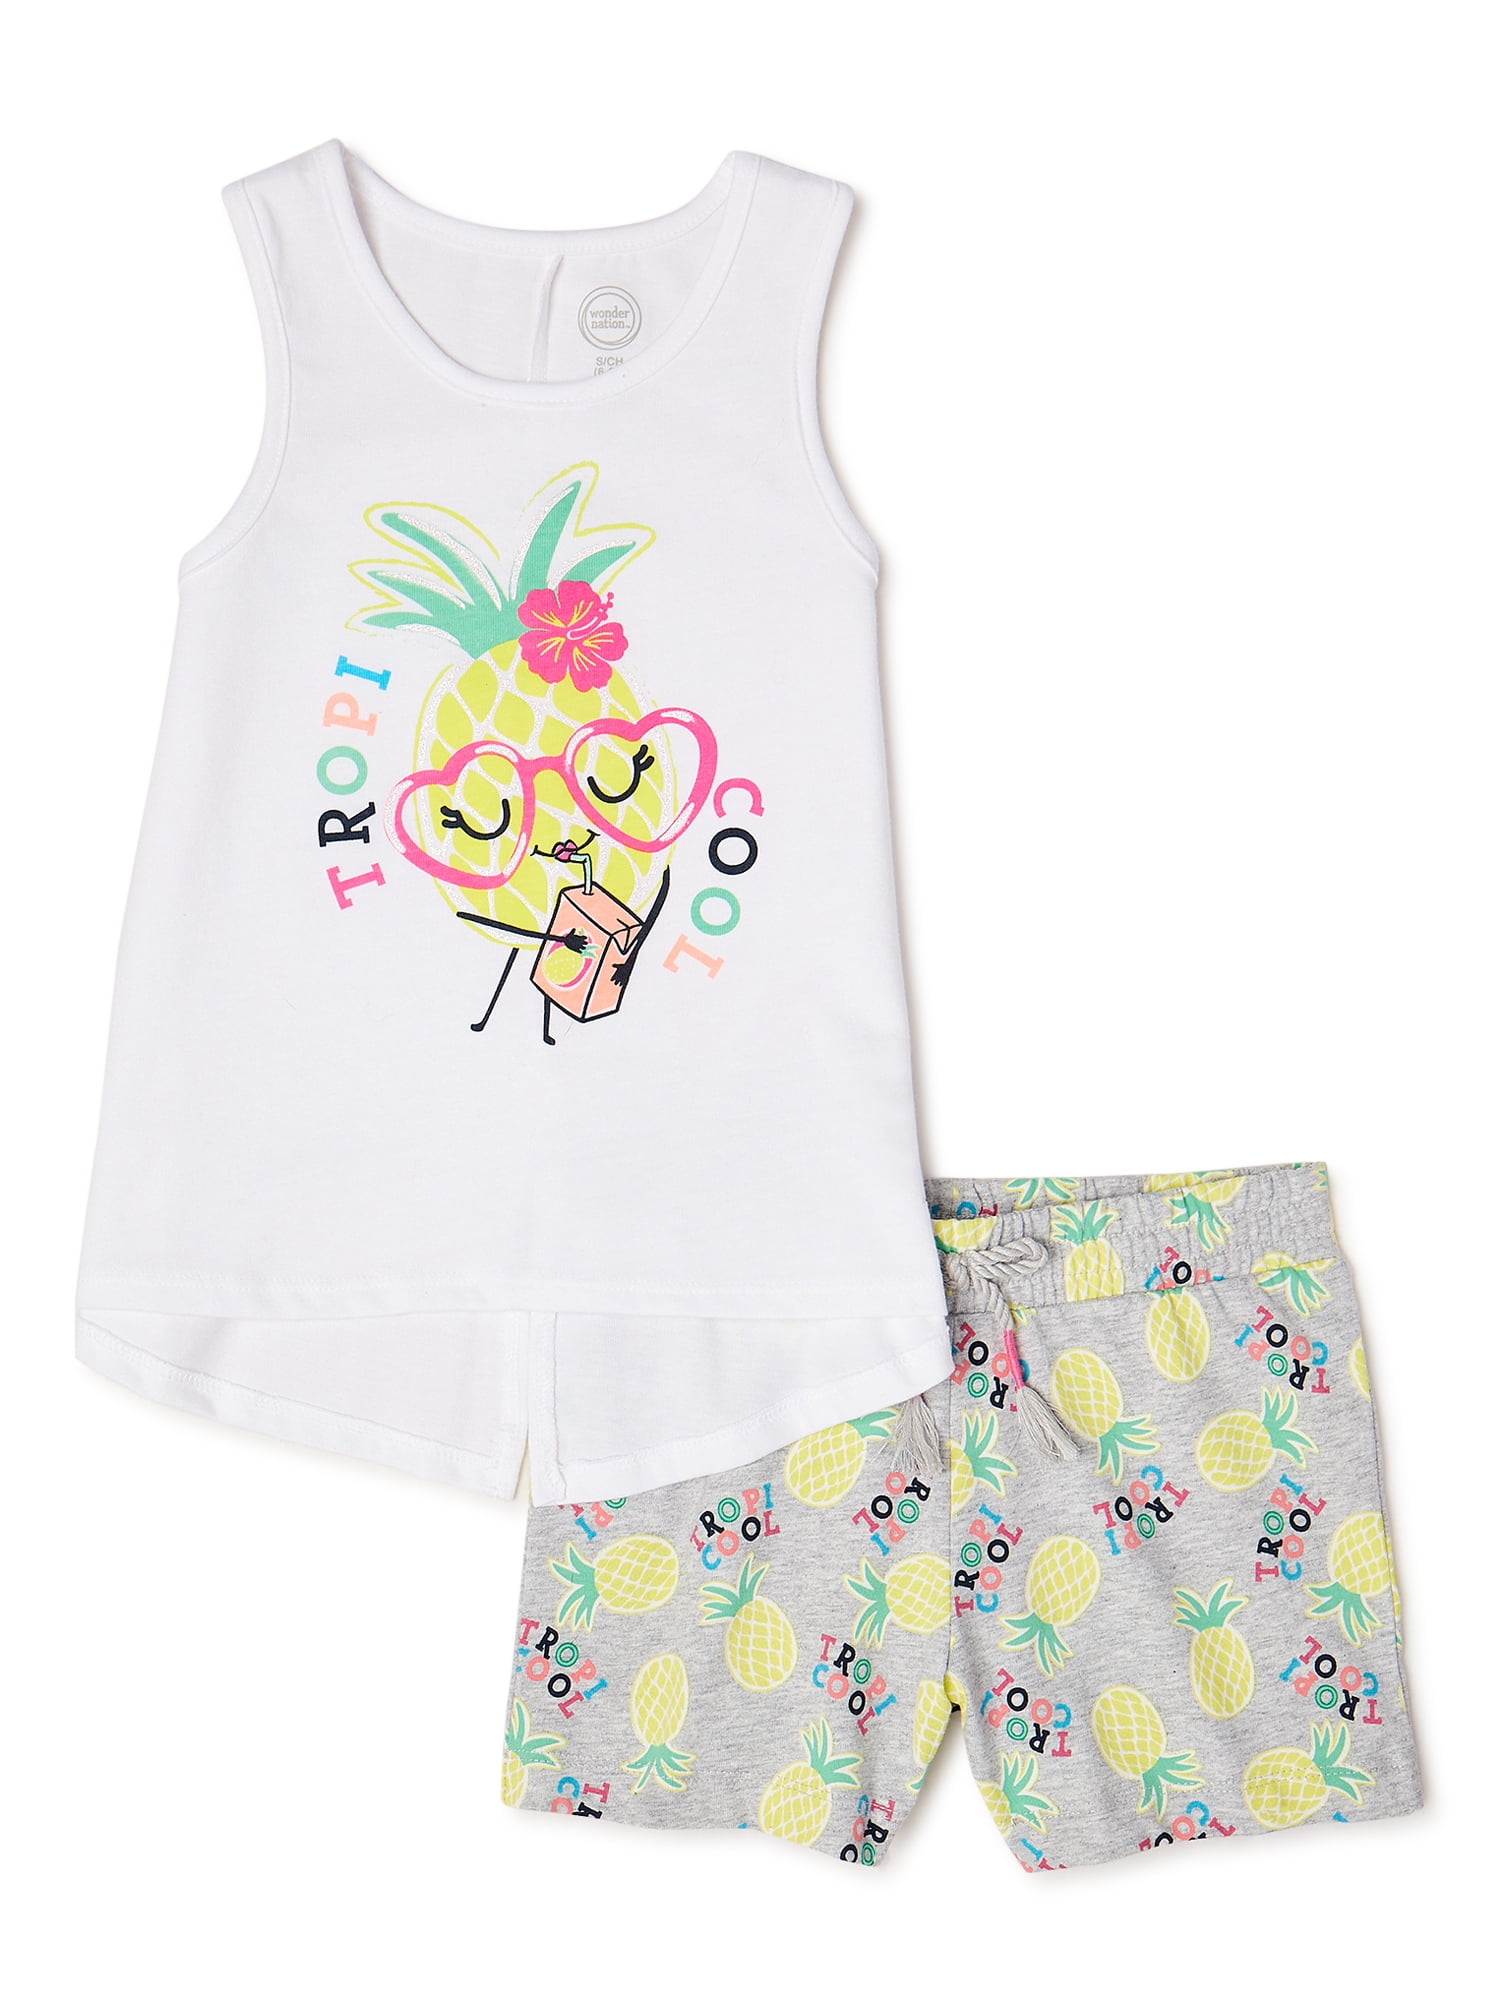 Wonder Nation Girls Graphic Tank Top and Shorts, 2-Piece Outfit Set ...